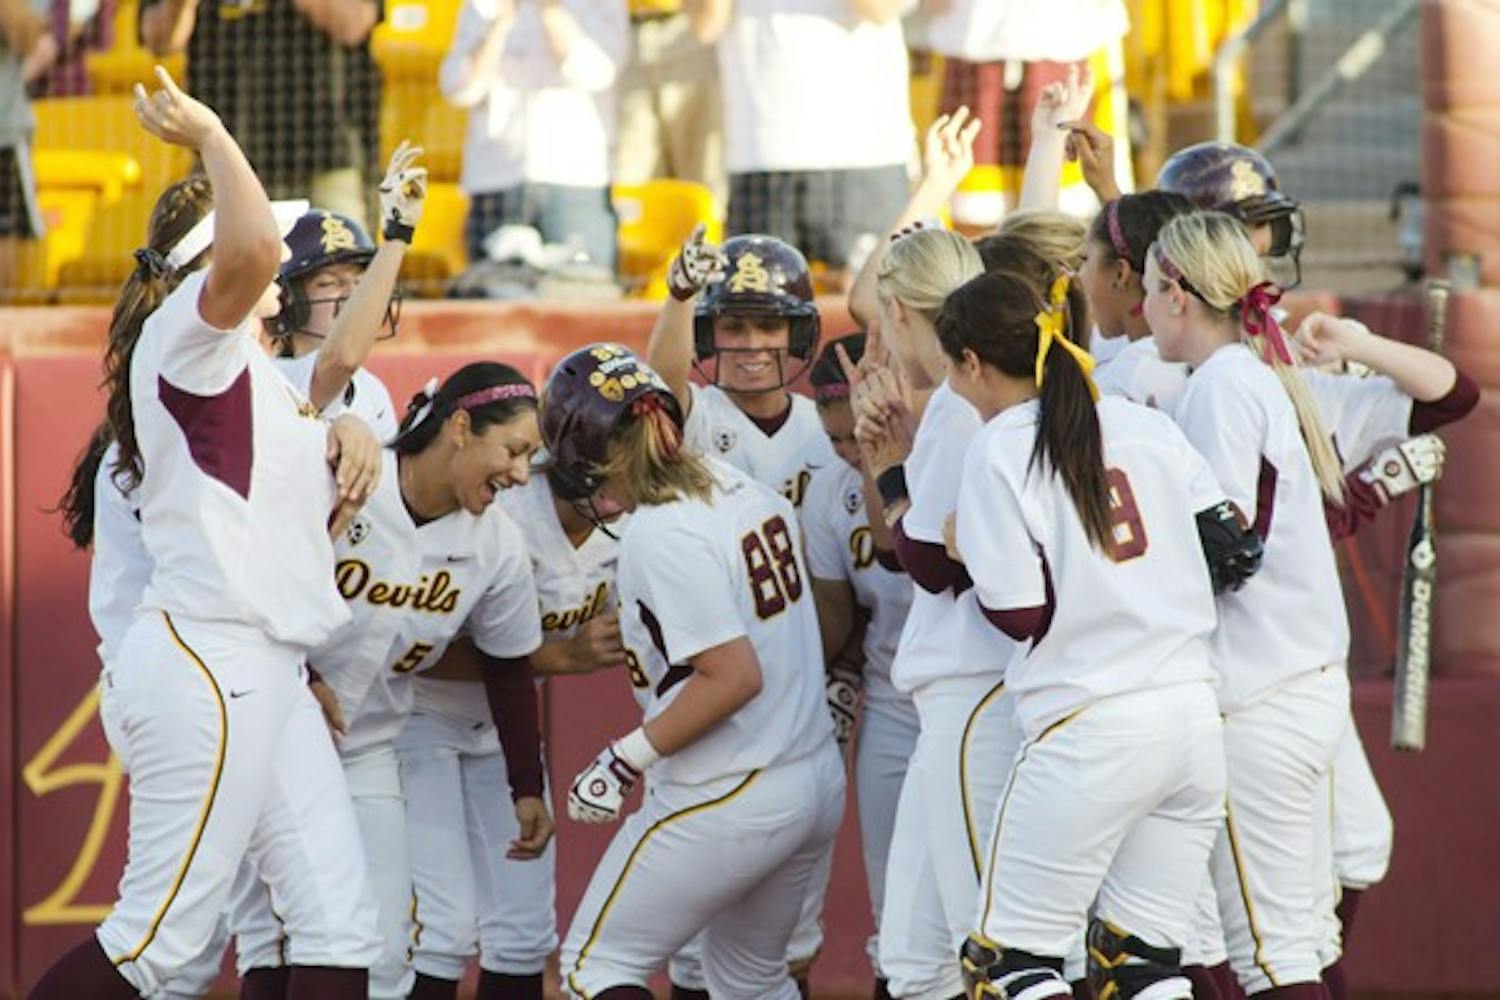 Groove is in the Heart: Junior Annie Lockwood celebrates with the rest of the Sun Devils after a home run against San Diego State on May 22. The team’s tendency to dance after home runs has become a common fixture throughout season. (Photo by Aaron Lavinsky)